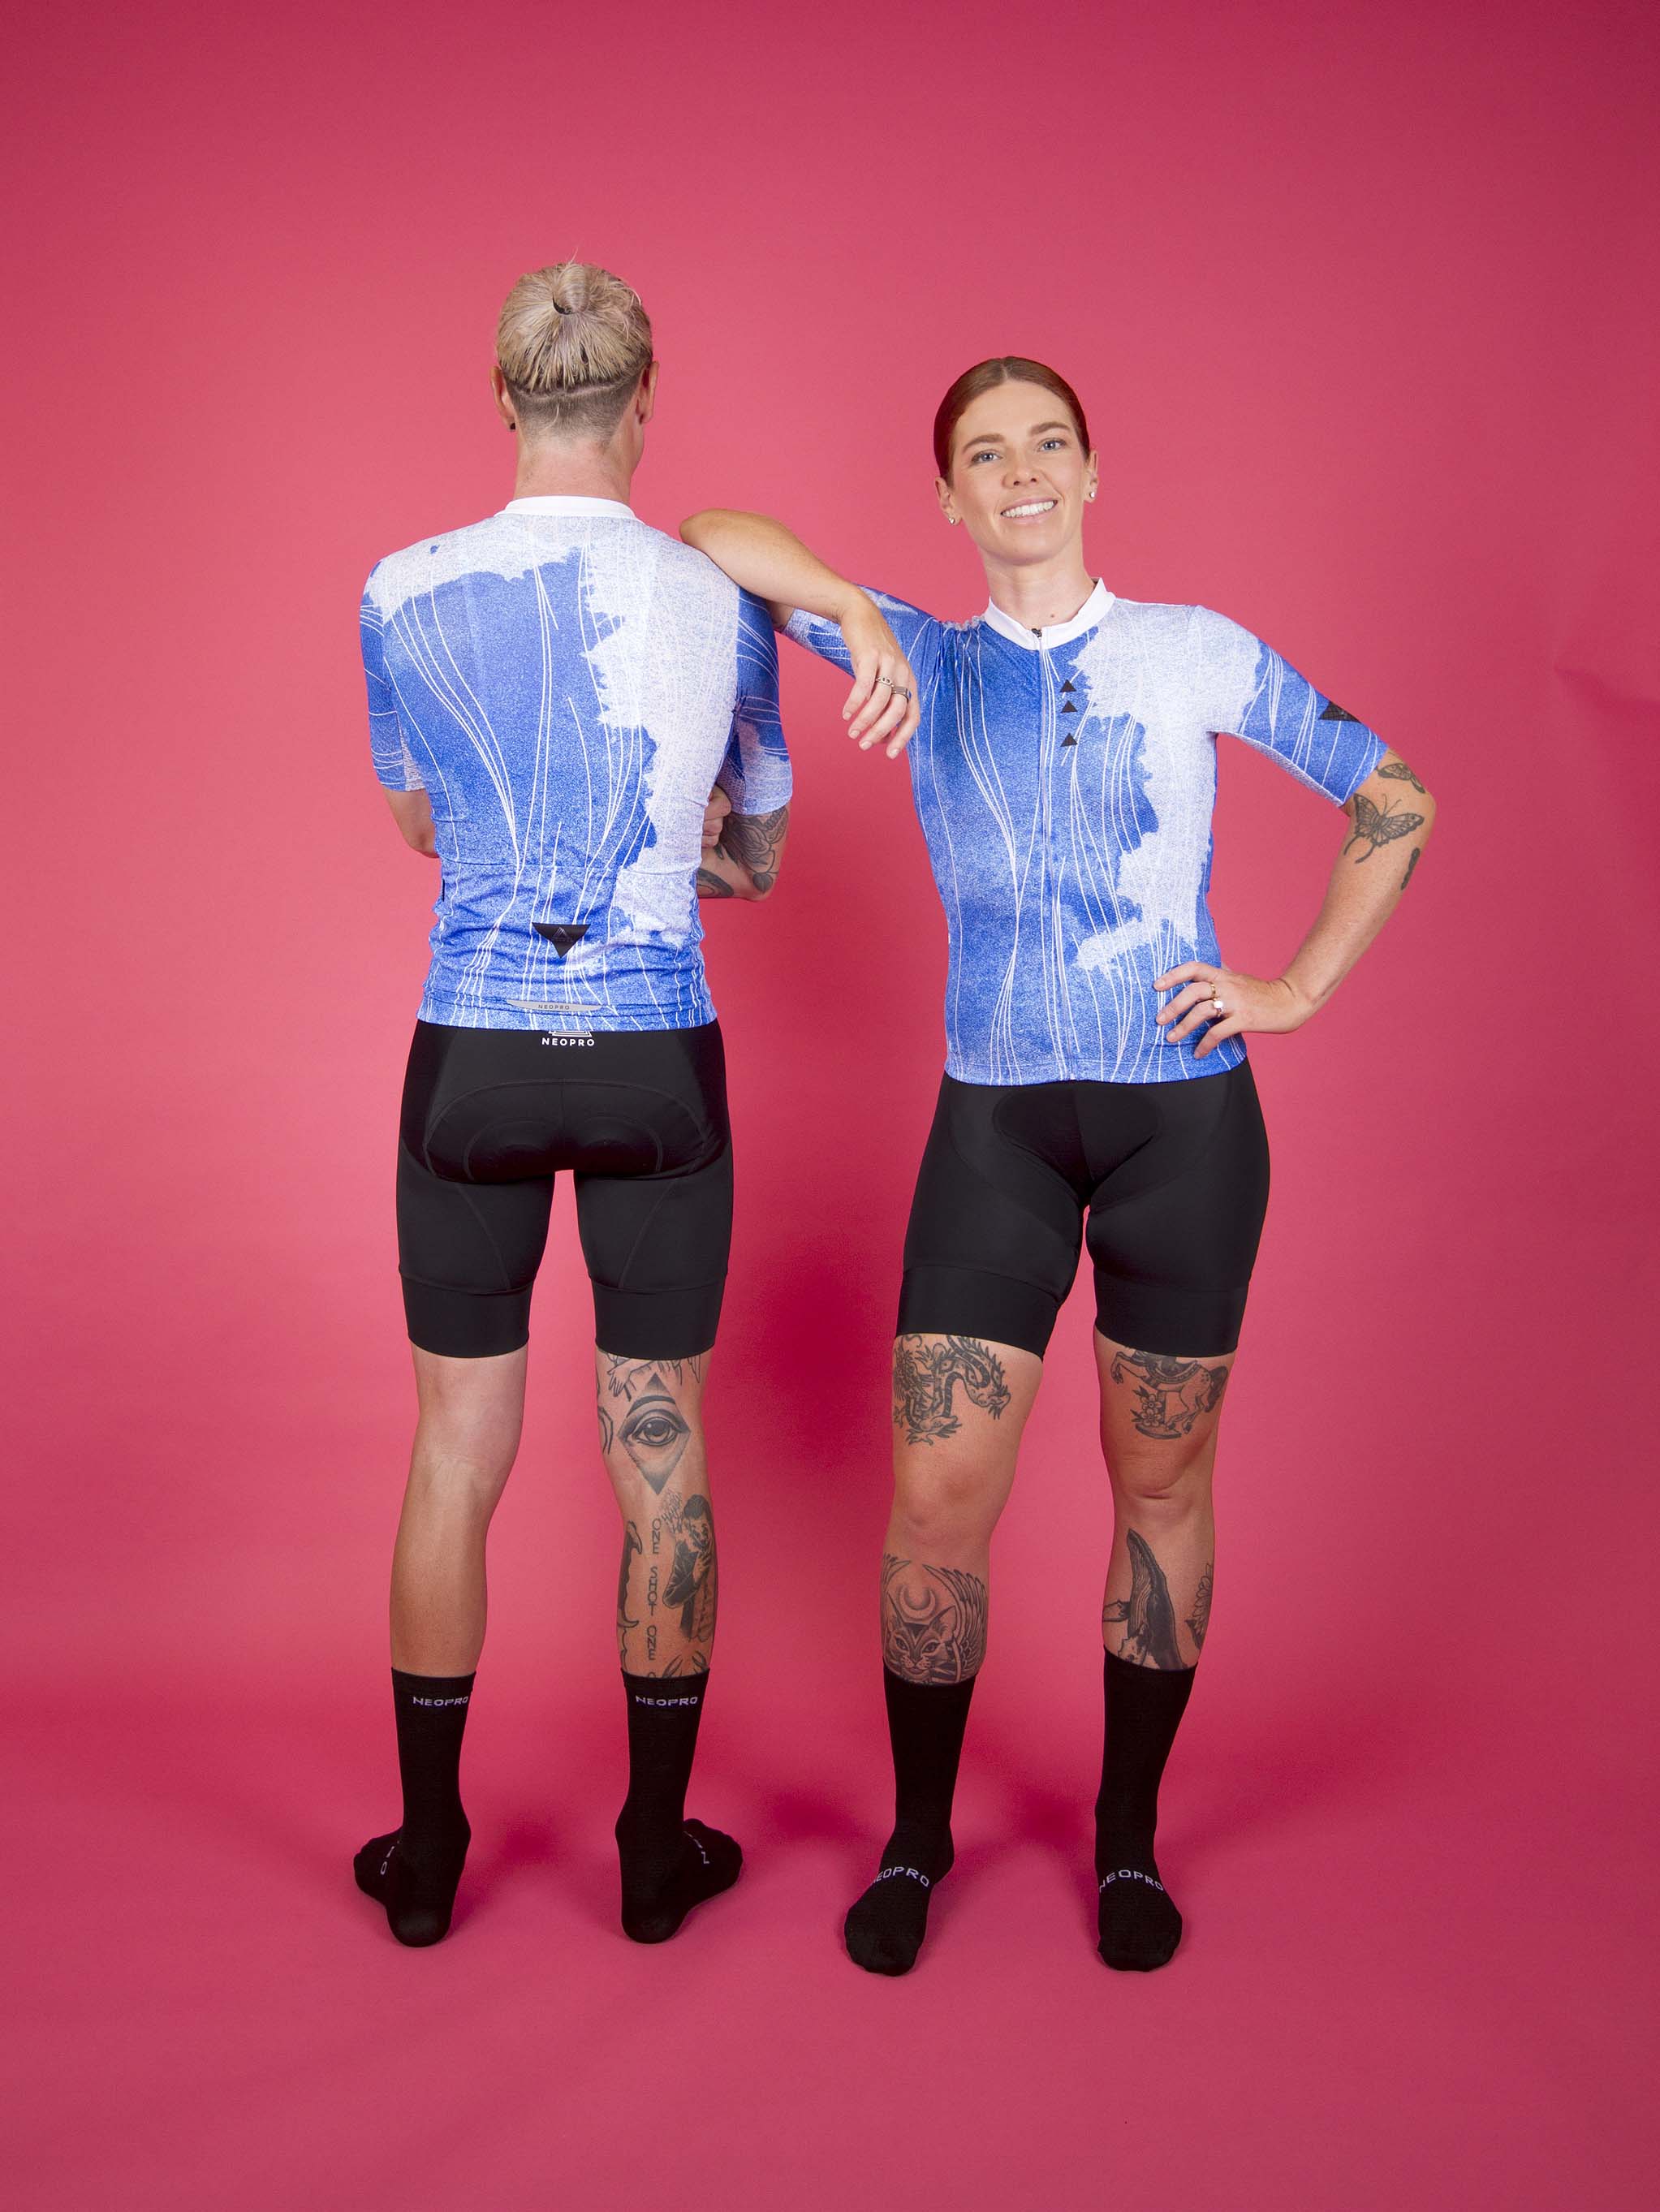 NeoPro Cycling: Shop Cycling Clothing & Kits in Australia